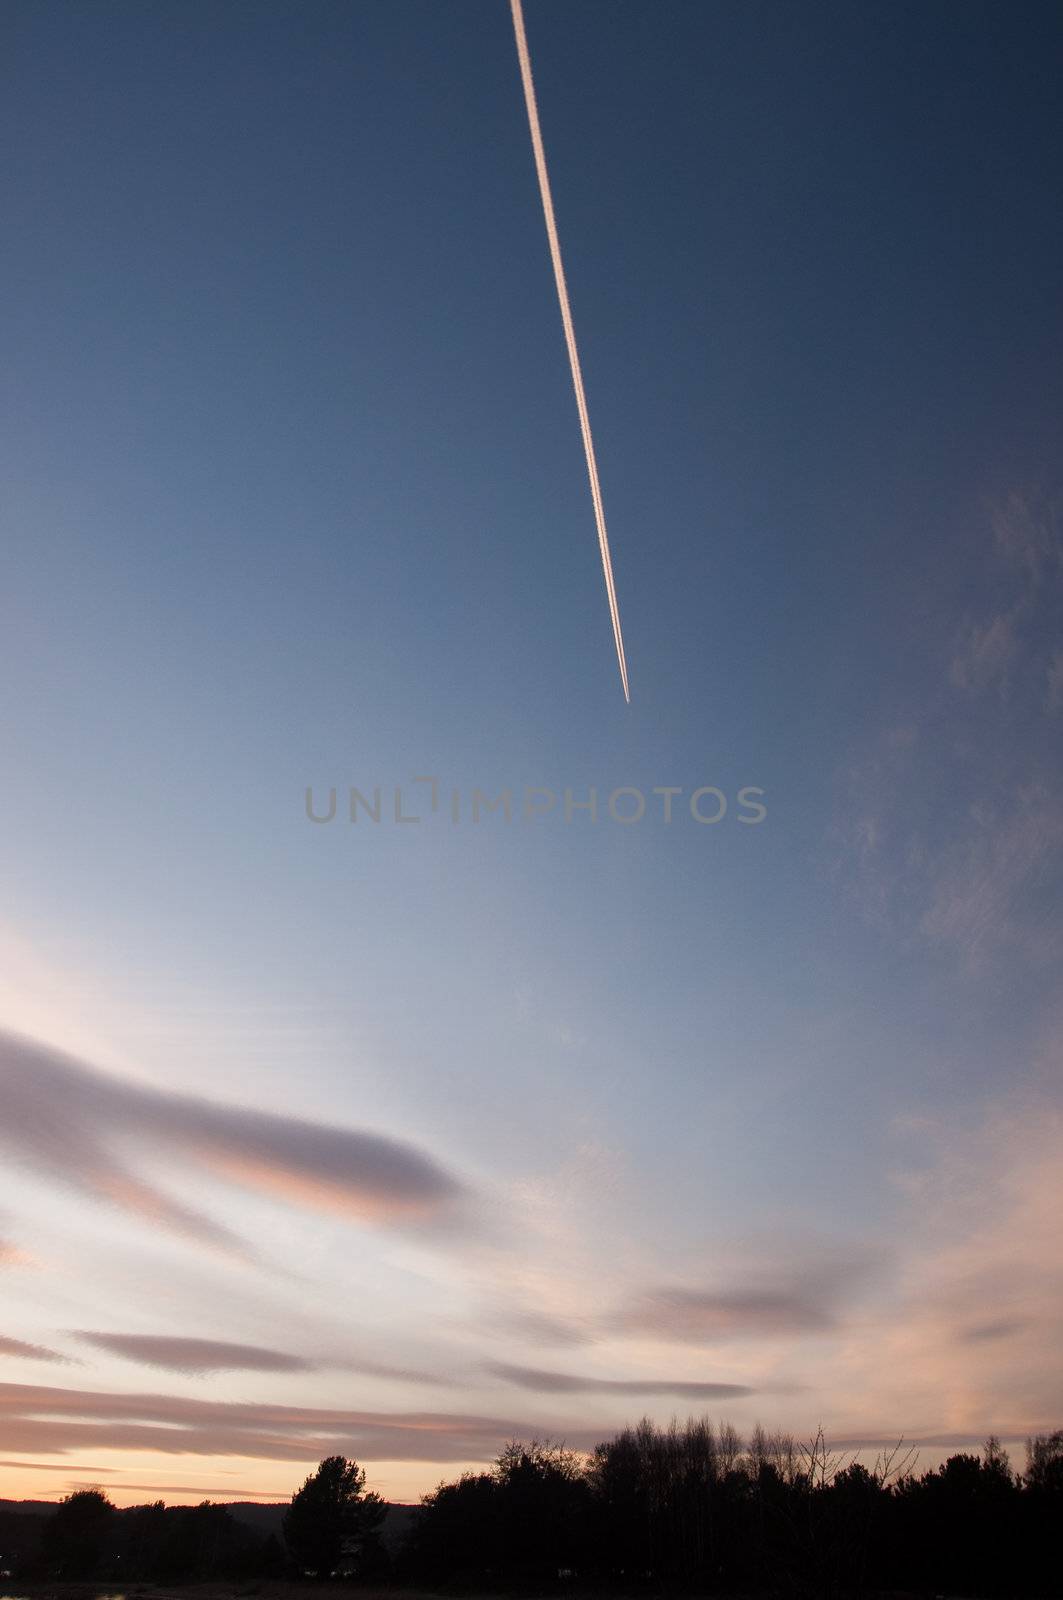 Airplane flying high leaving a contrail on a blue sky at sunset